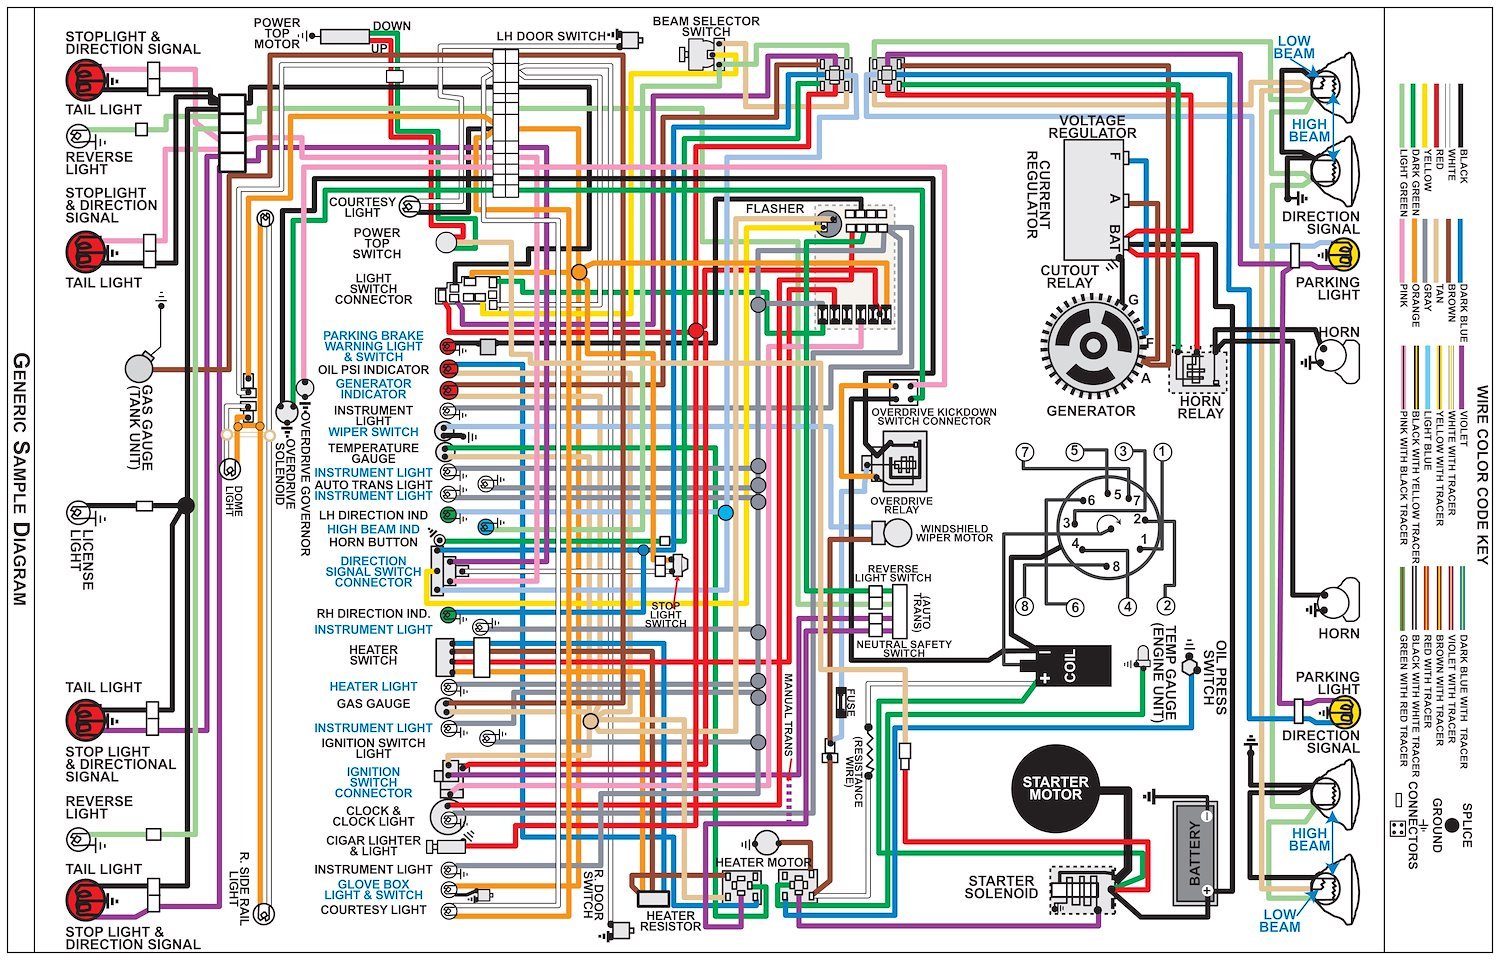 Wiring Diagram for 1971 Plymouth Road Runner, Satellite with Rallye Dash, 11 in x 17 in., Laminated